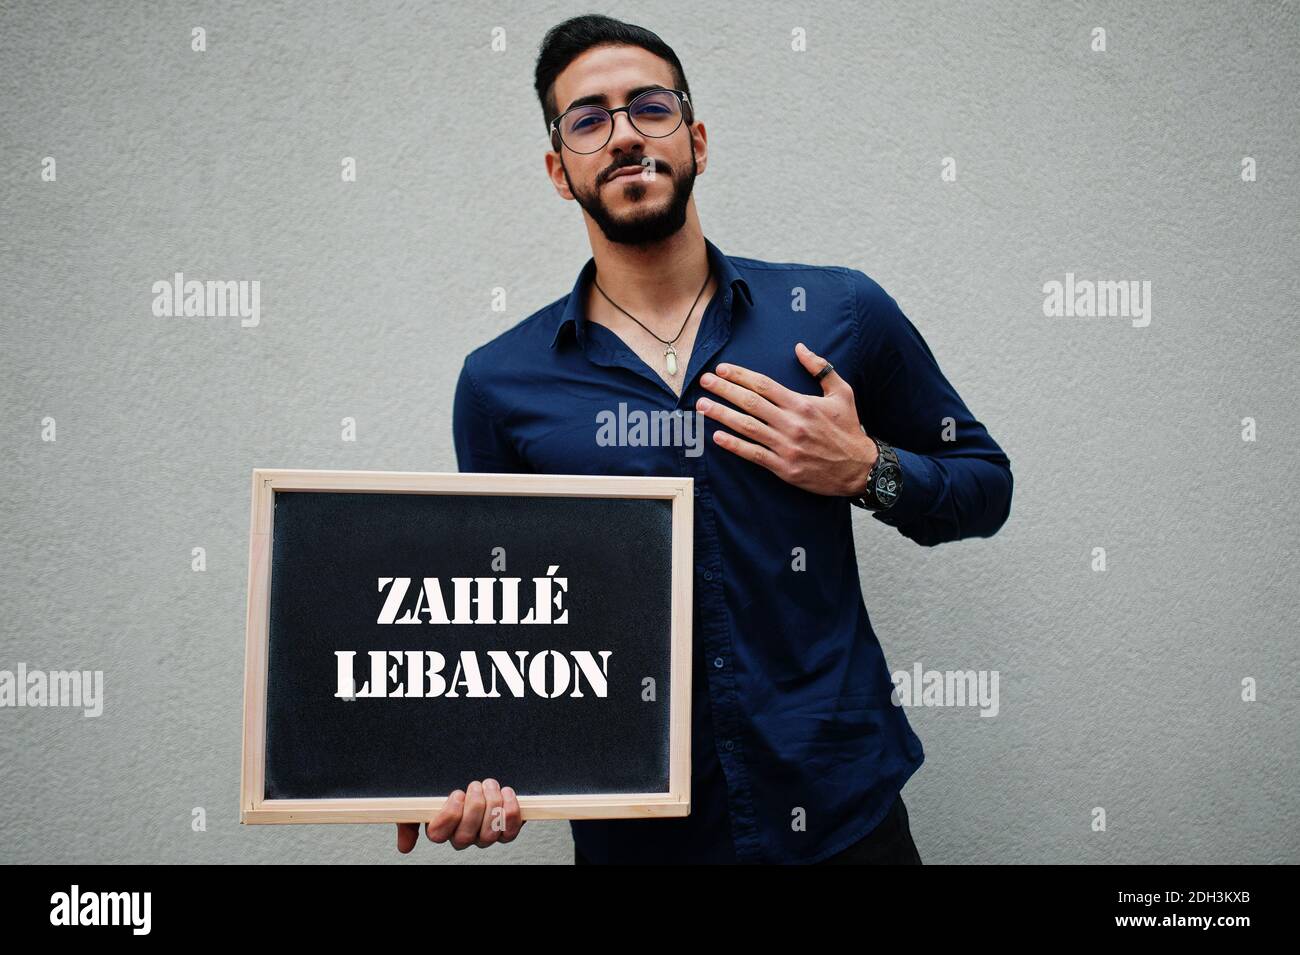 Arab man wear blue shirt and eyeglasses hold board with Zahle Lebanon inscription. Largest cities in islamic world concept. Stock Photo